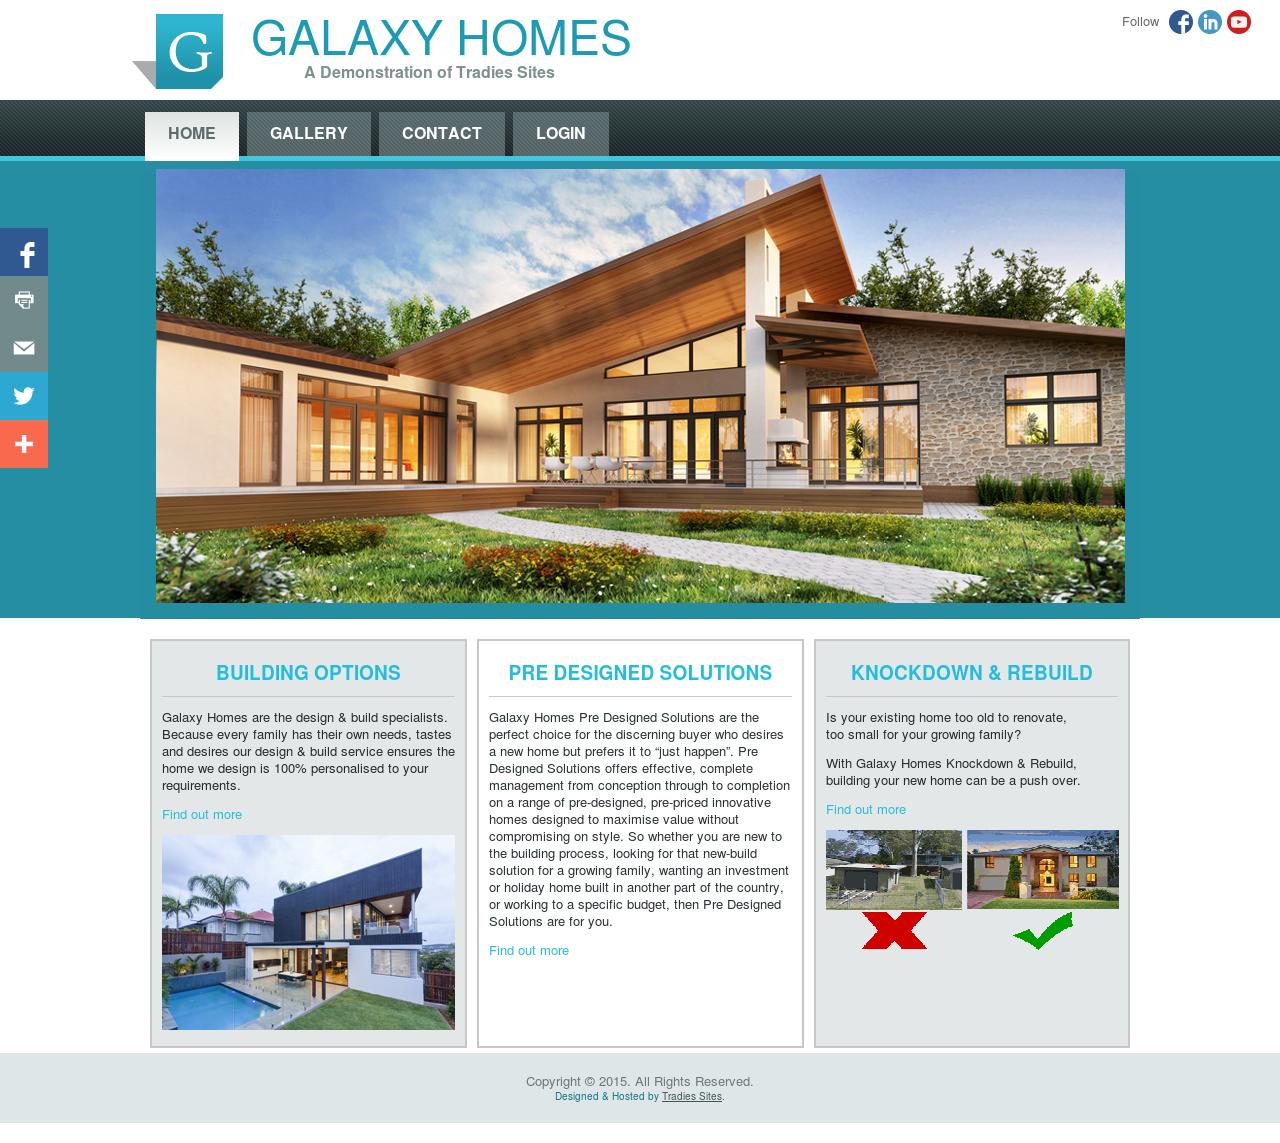 Galaxy Homes - A demonstration site